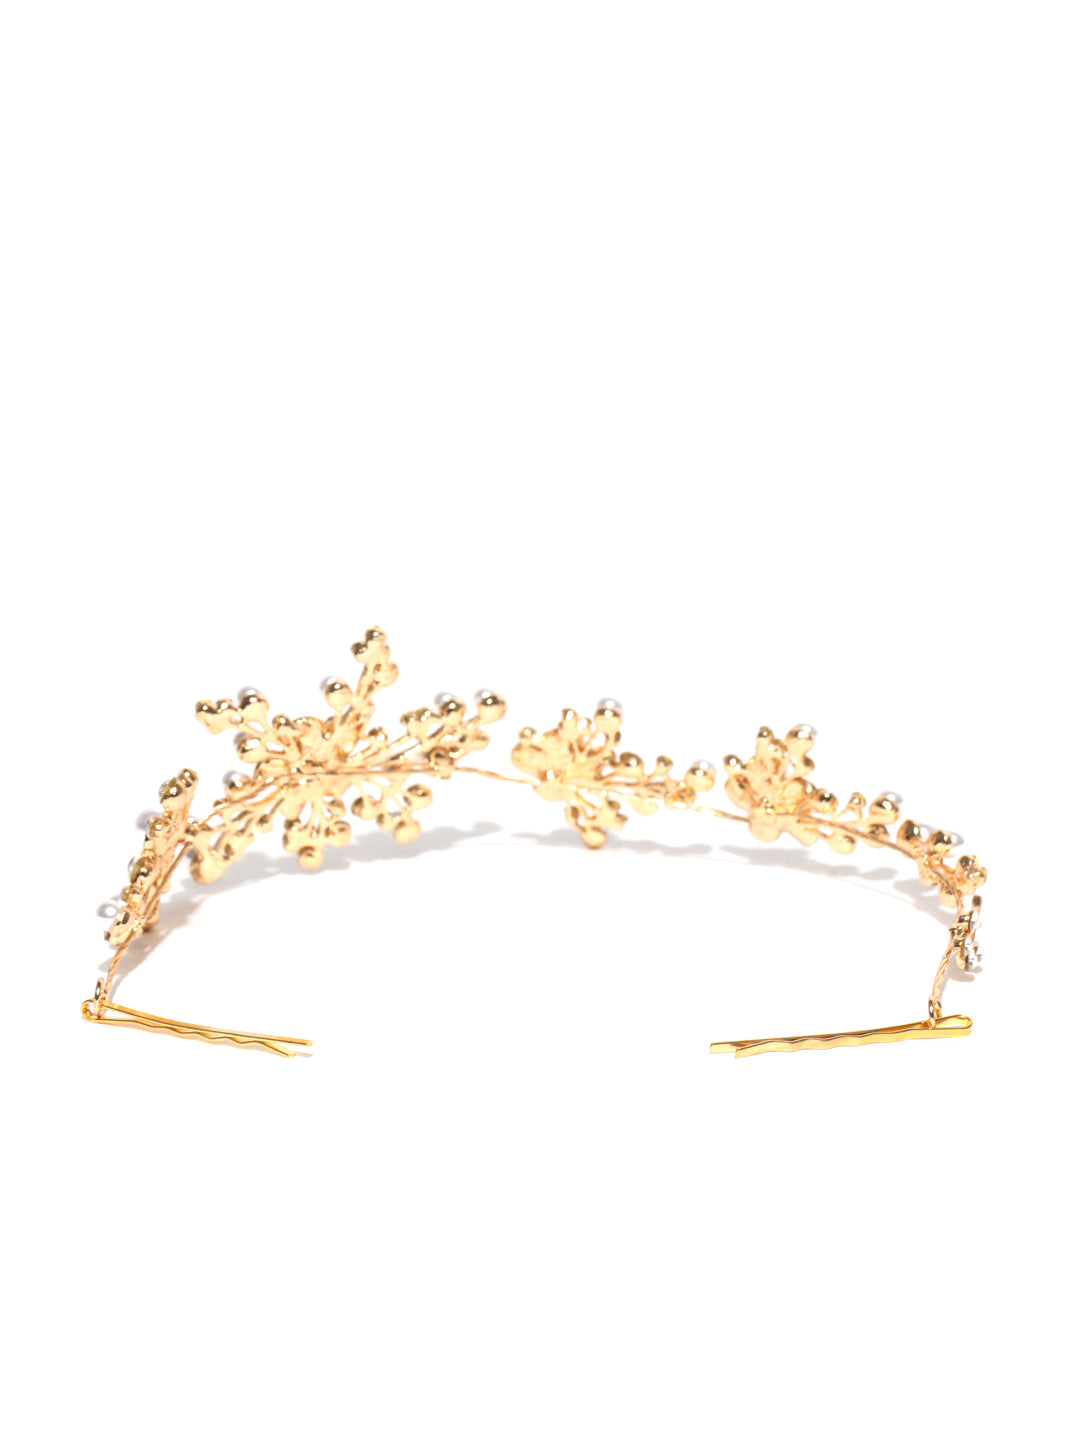 Gold Foldable Floral Stone Hair Clip With Pins For Women